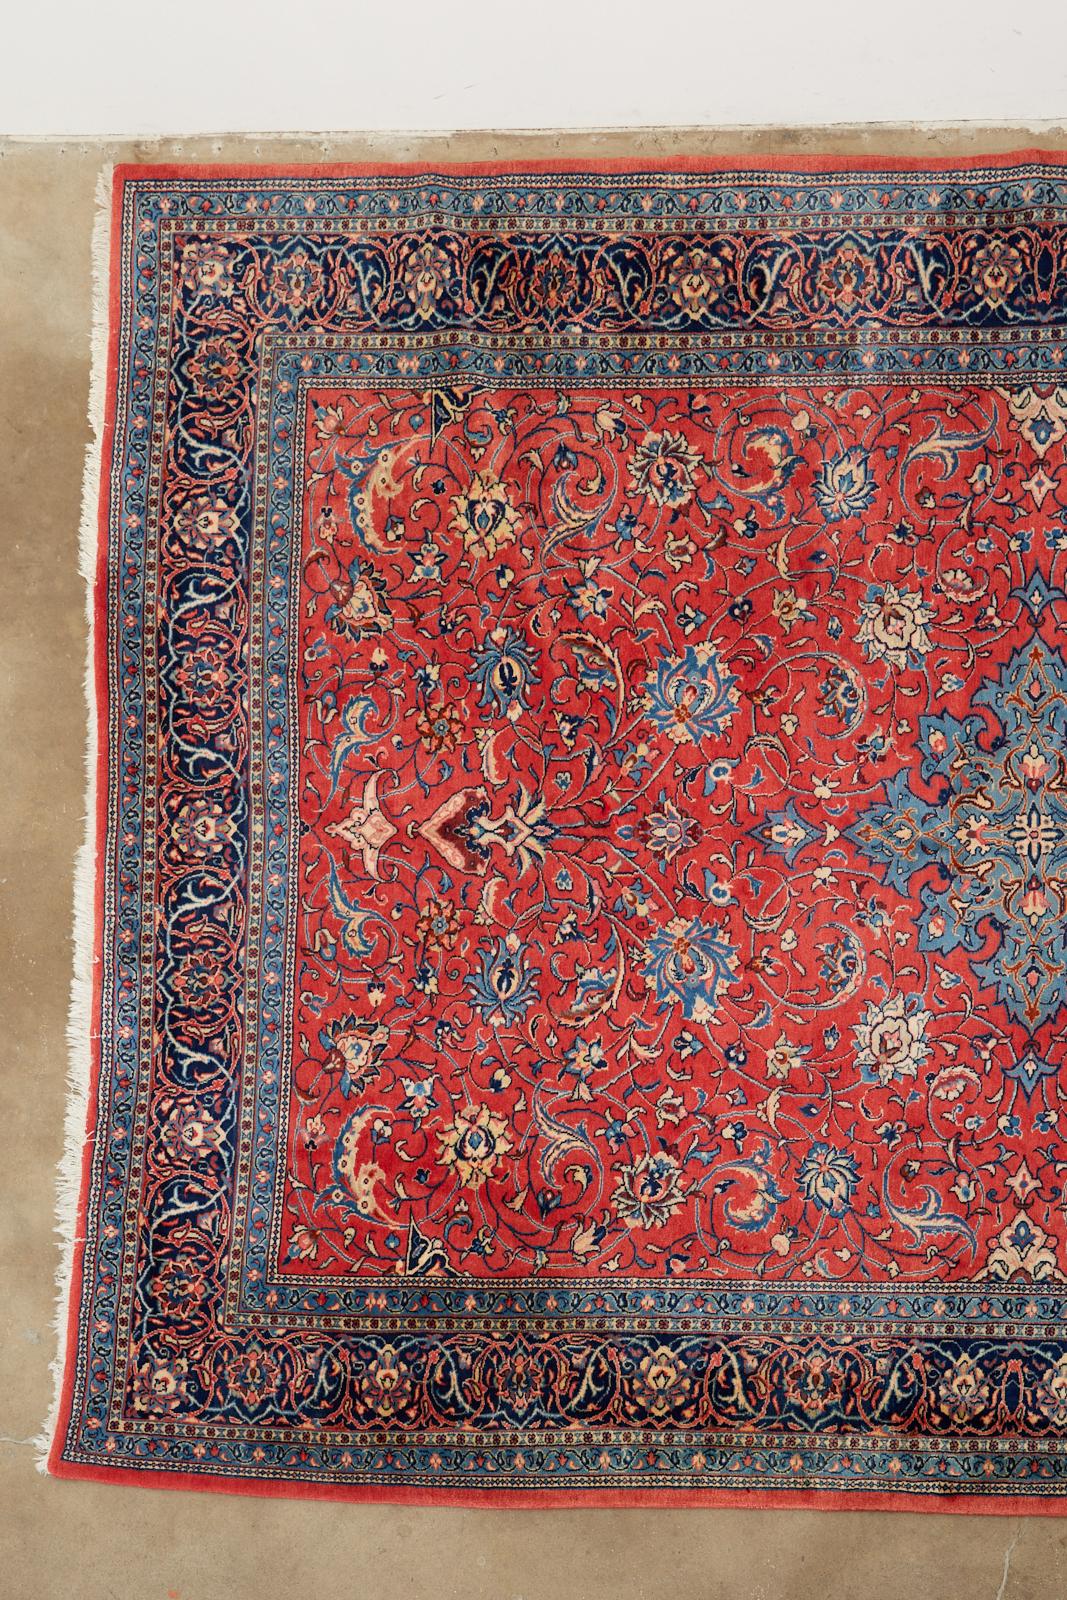 Luxurious traditional Persian Sarouk rug featuring a star shaped medallion over a vibrant ruby red field. The rug has a velvety soft hand knotted wool pile with designs of scrolling floral vines and stems. The borders have a deep powder blue and